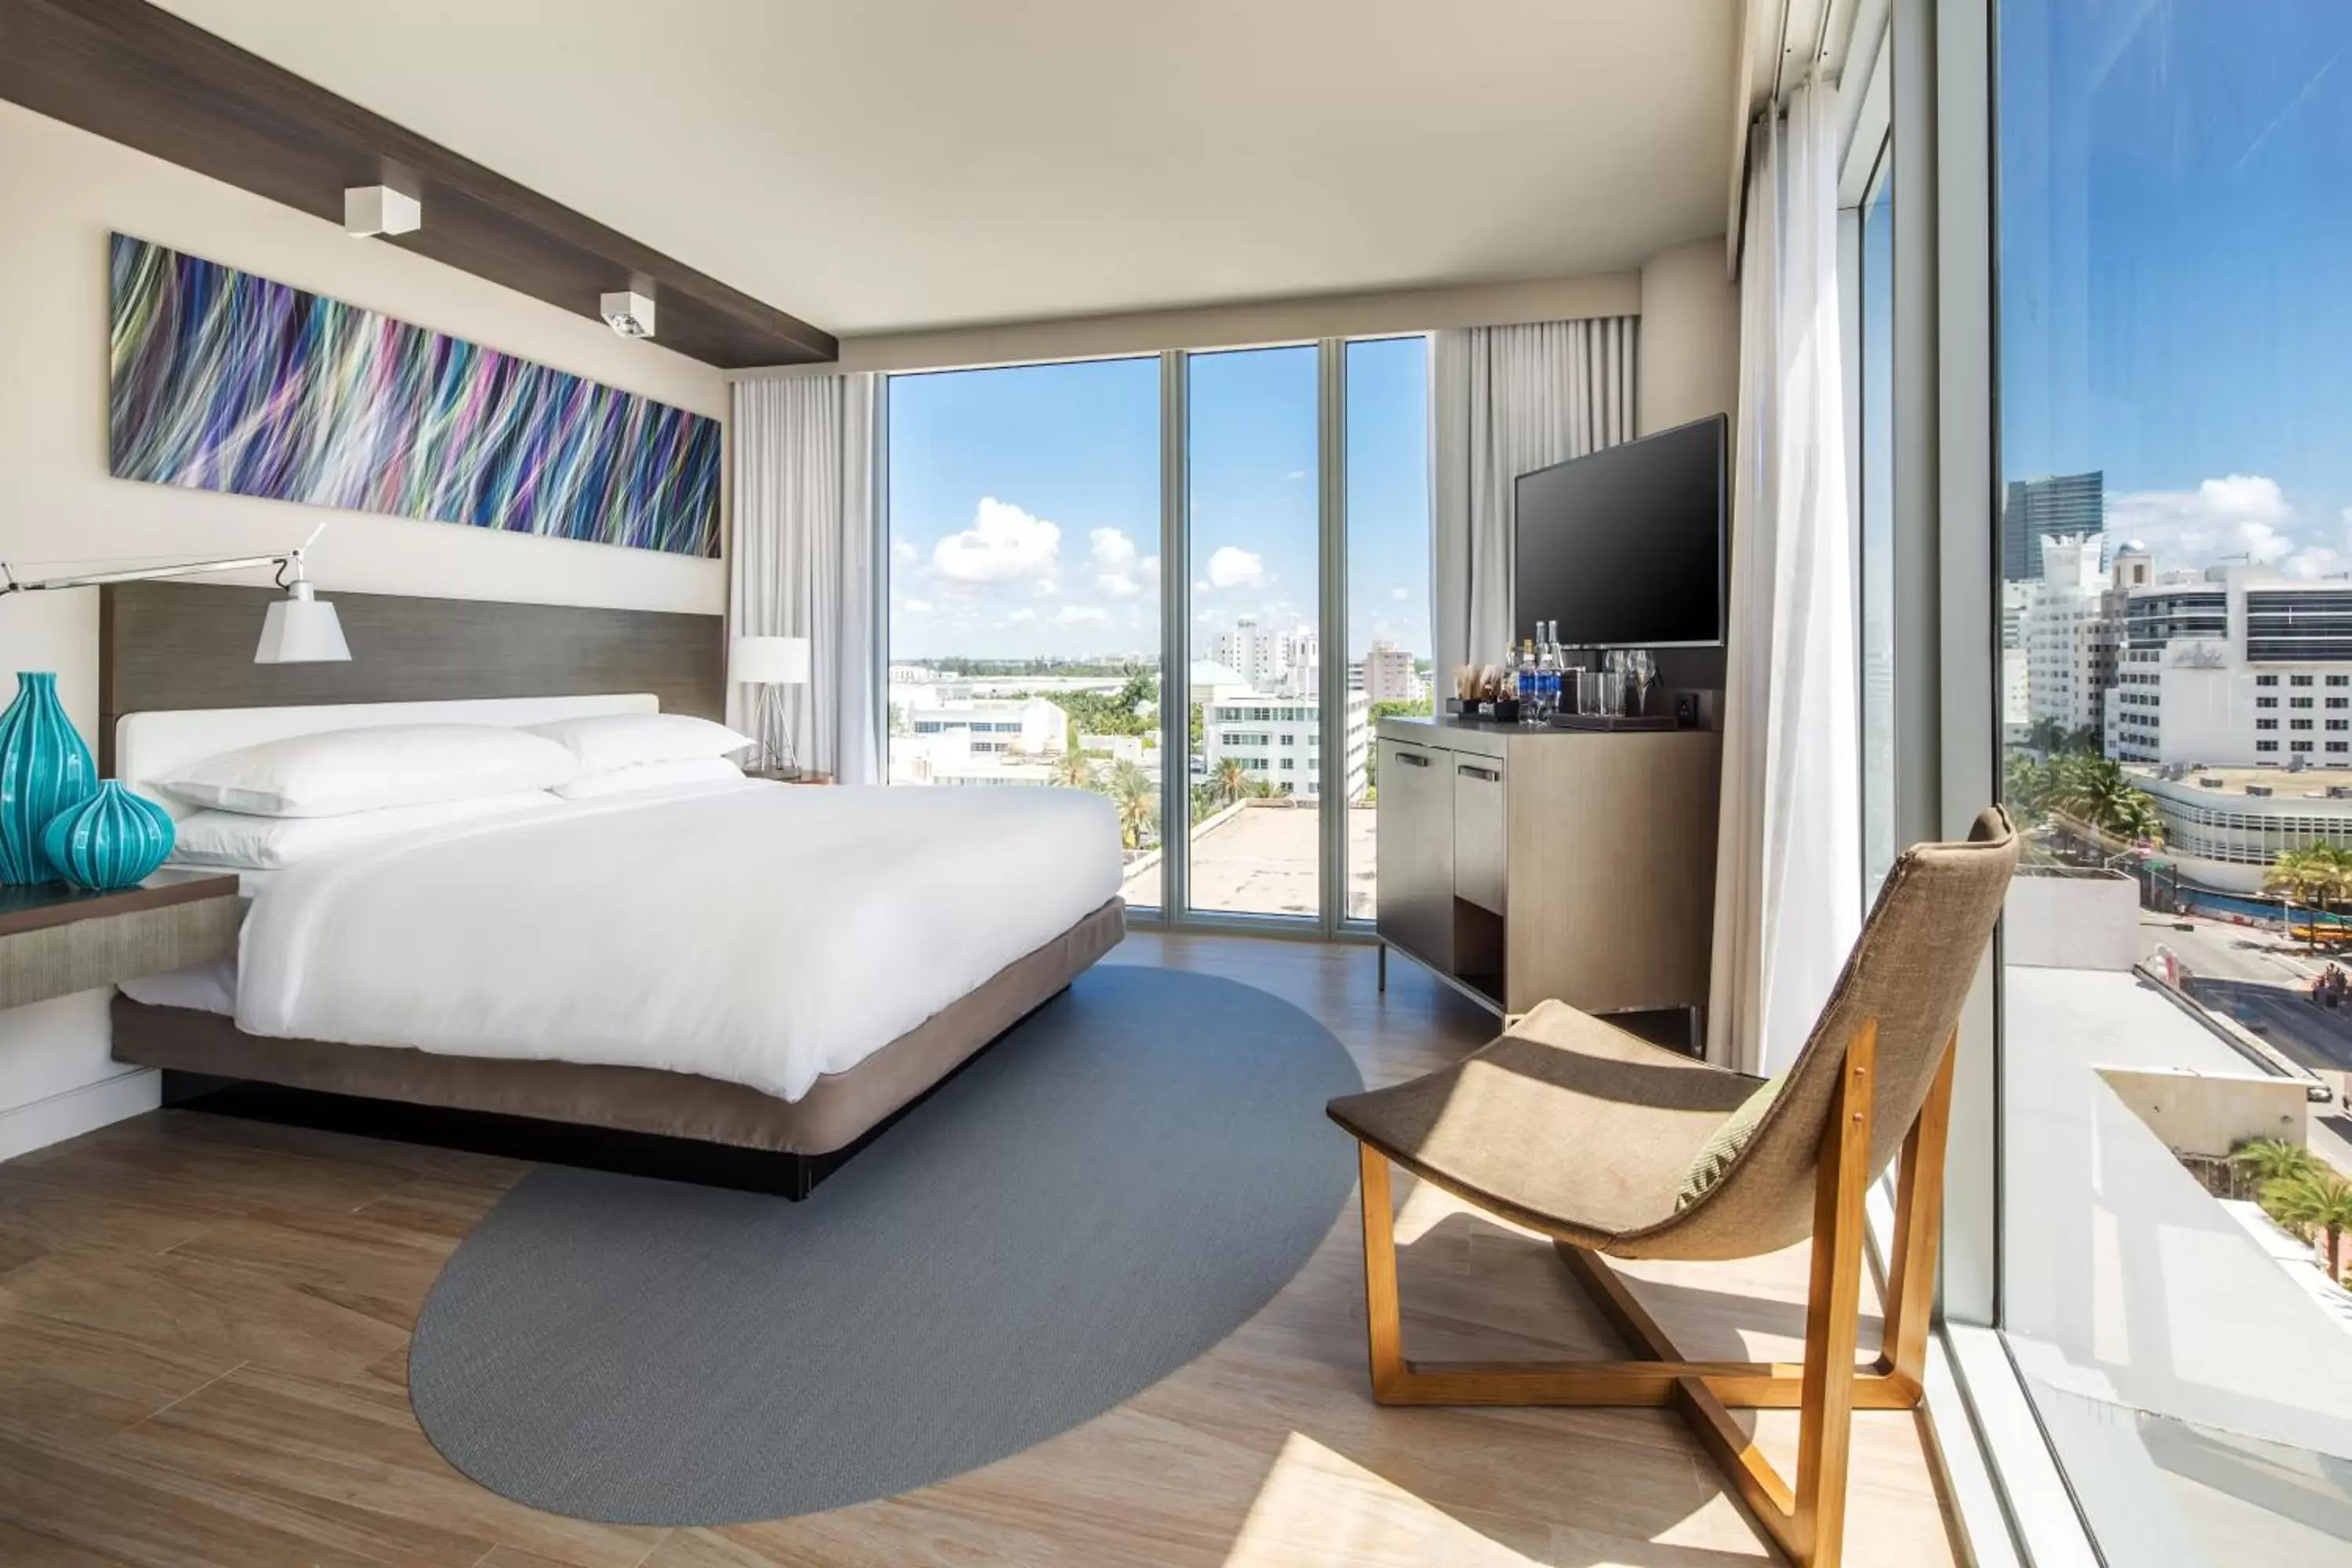 Deluxe King Room in Hyatt Centric South Beach Miami